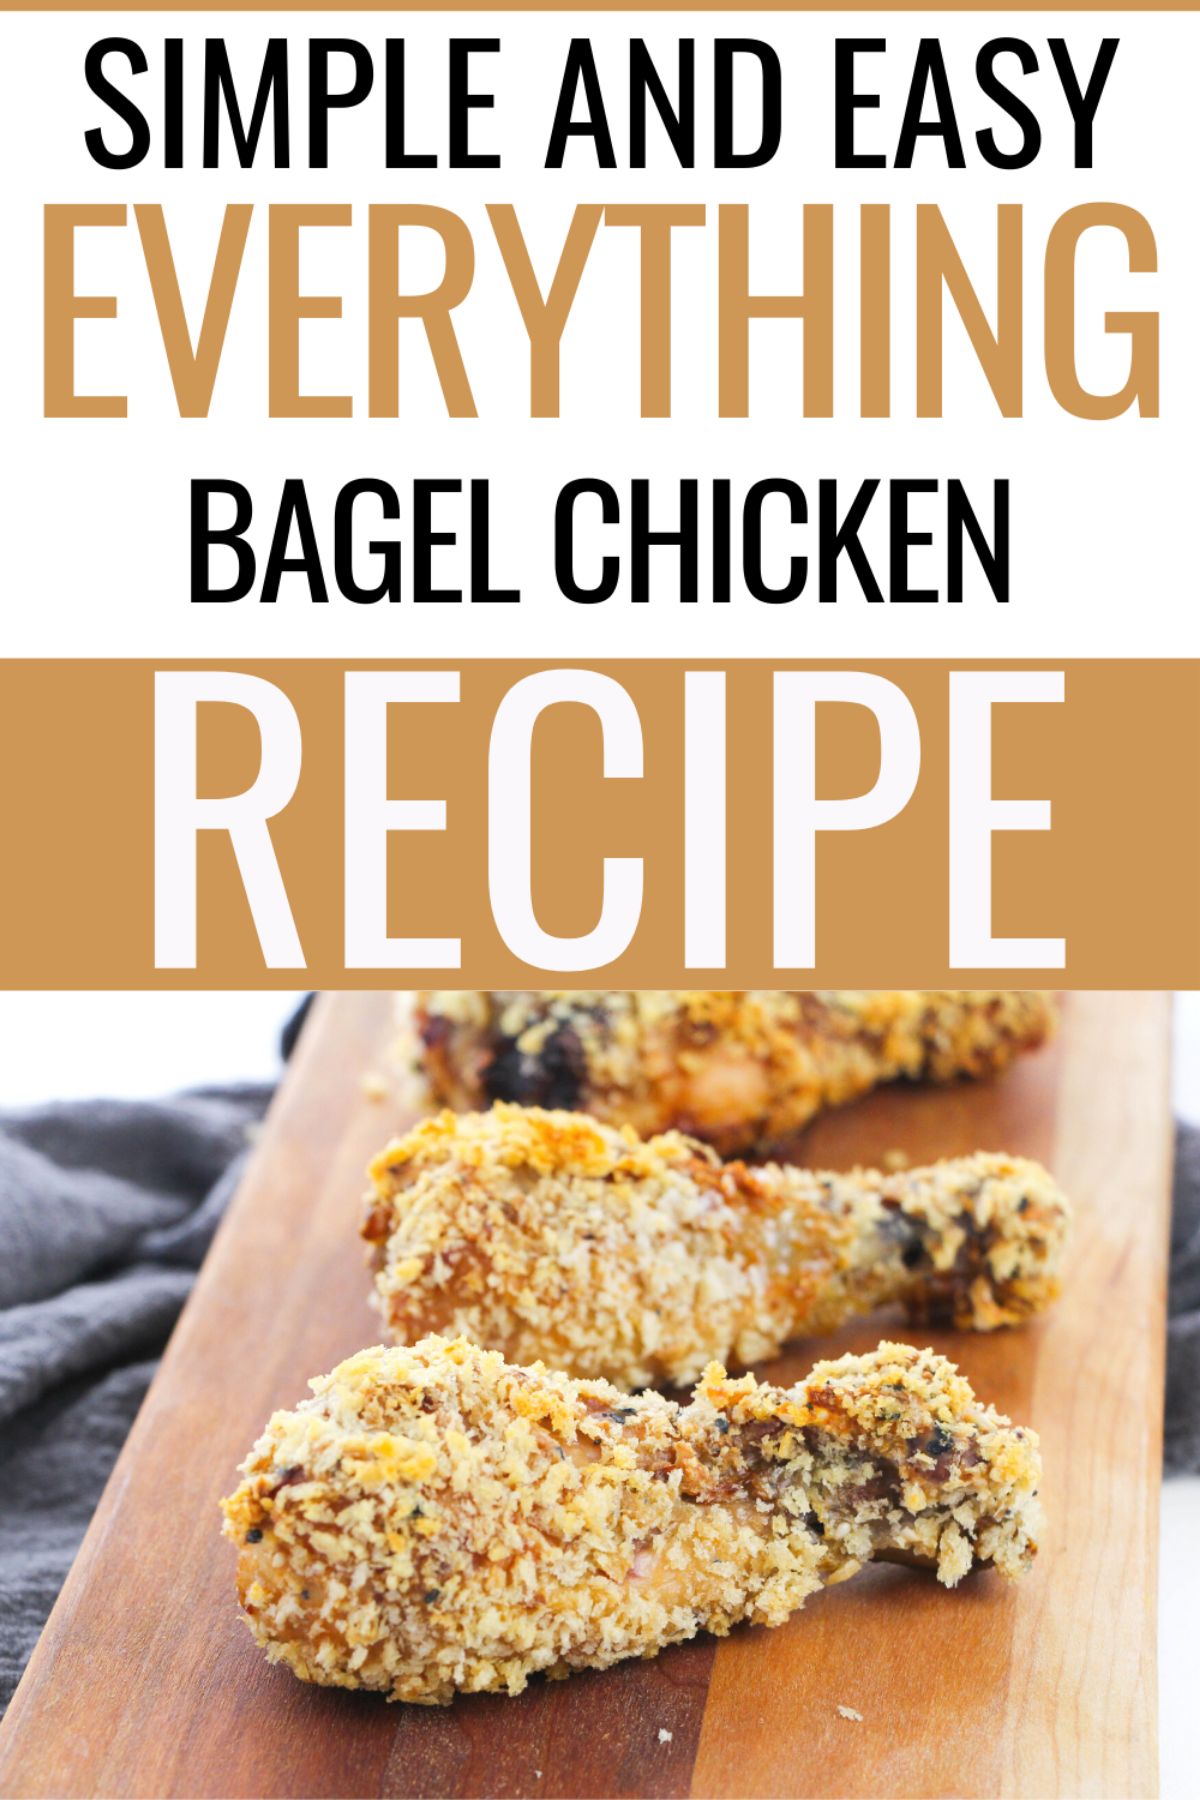 Image of Everything Bagel Chicken drumsticks on a rectangular wooden with a text at the upper half of the image saying "Simple and Easy Everything Bagel Chicken Recipe"